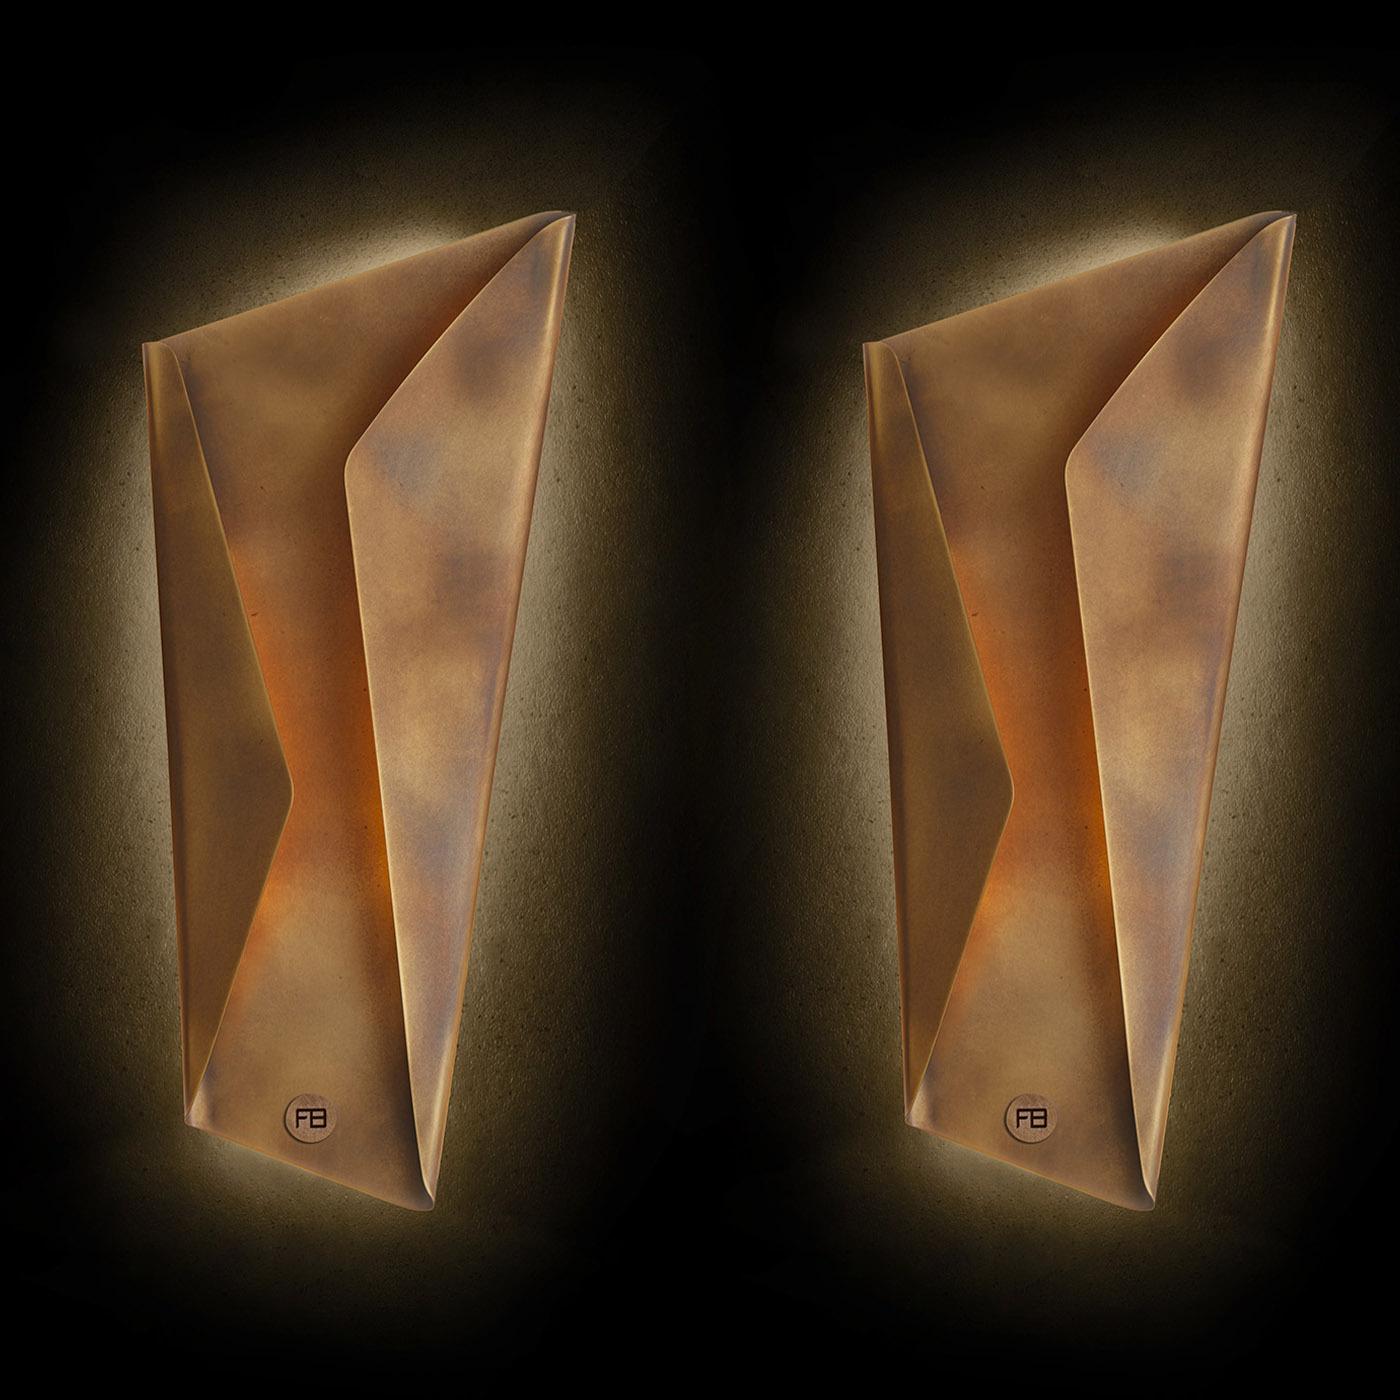 Wall lamp designed in two configurations and two different sizes, composed of curved laser-cut metal sheets available in different finishes: burnished brass, bronze, and graphite. It can be installed both horizontally and vertically. Double ignition